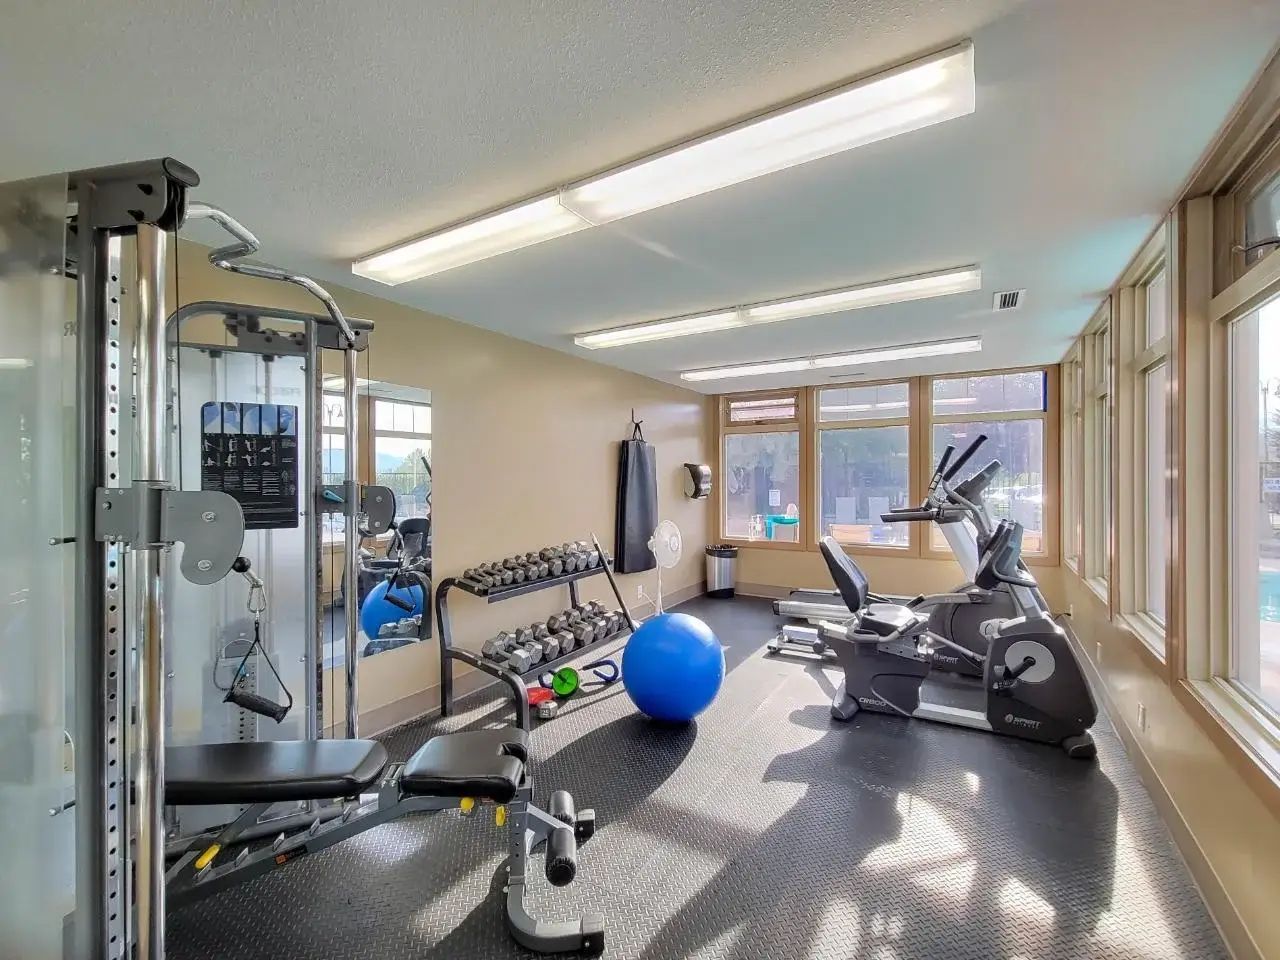 Fitness gym centre of the lake view condo in Lake Windermere Pointe BC Vacation Rental in Invermere hosted by Aisling Baile Property Management. 